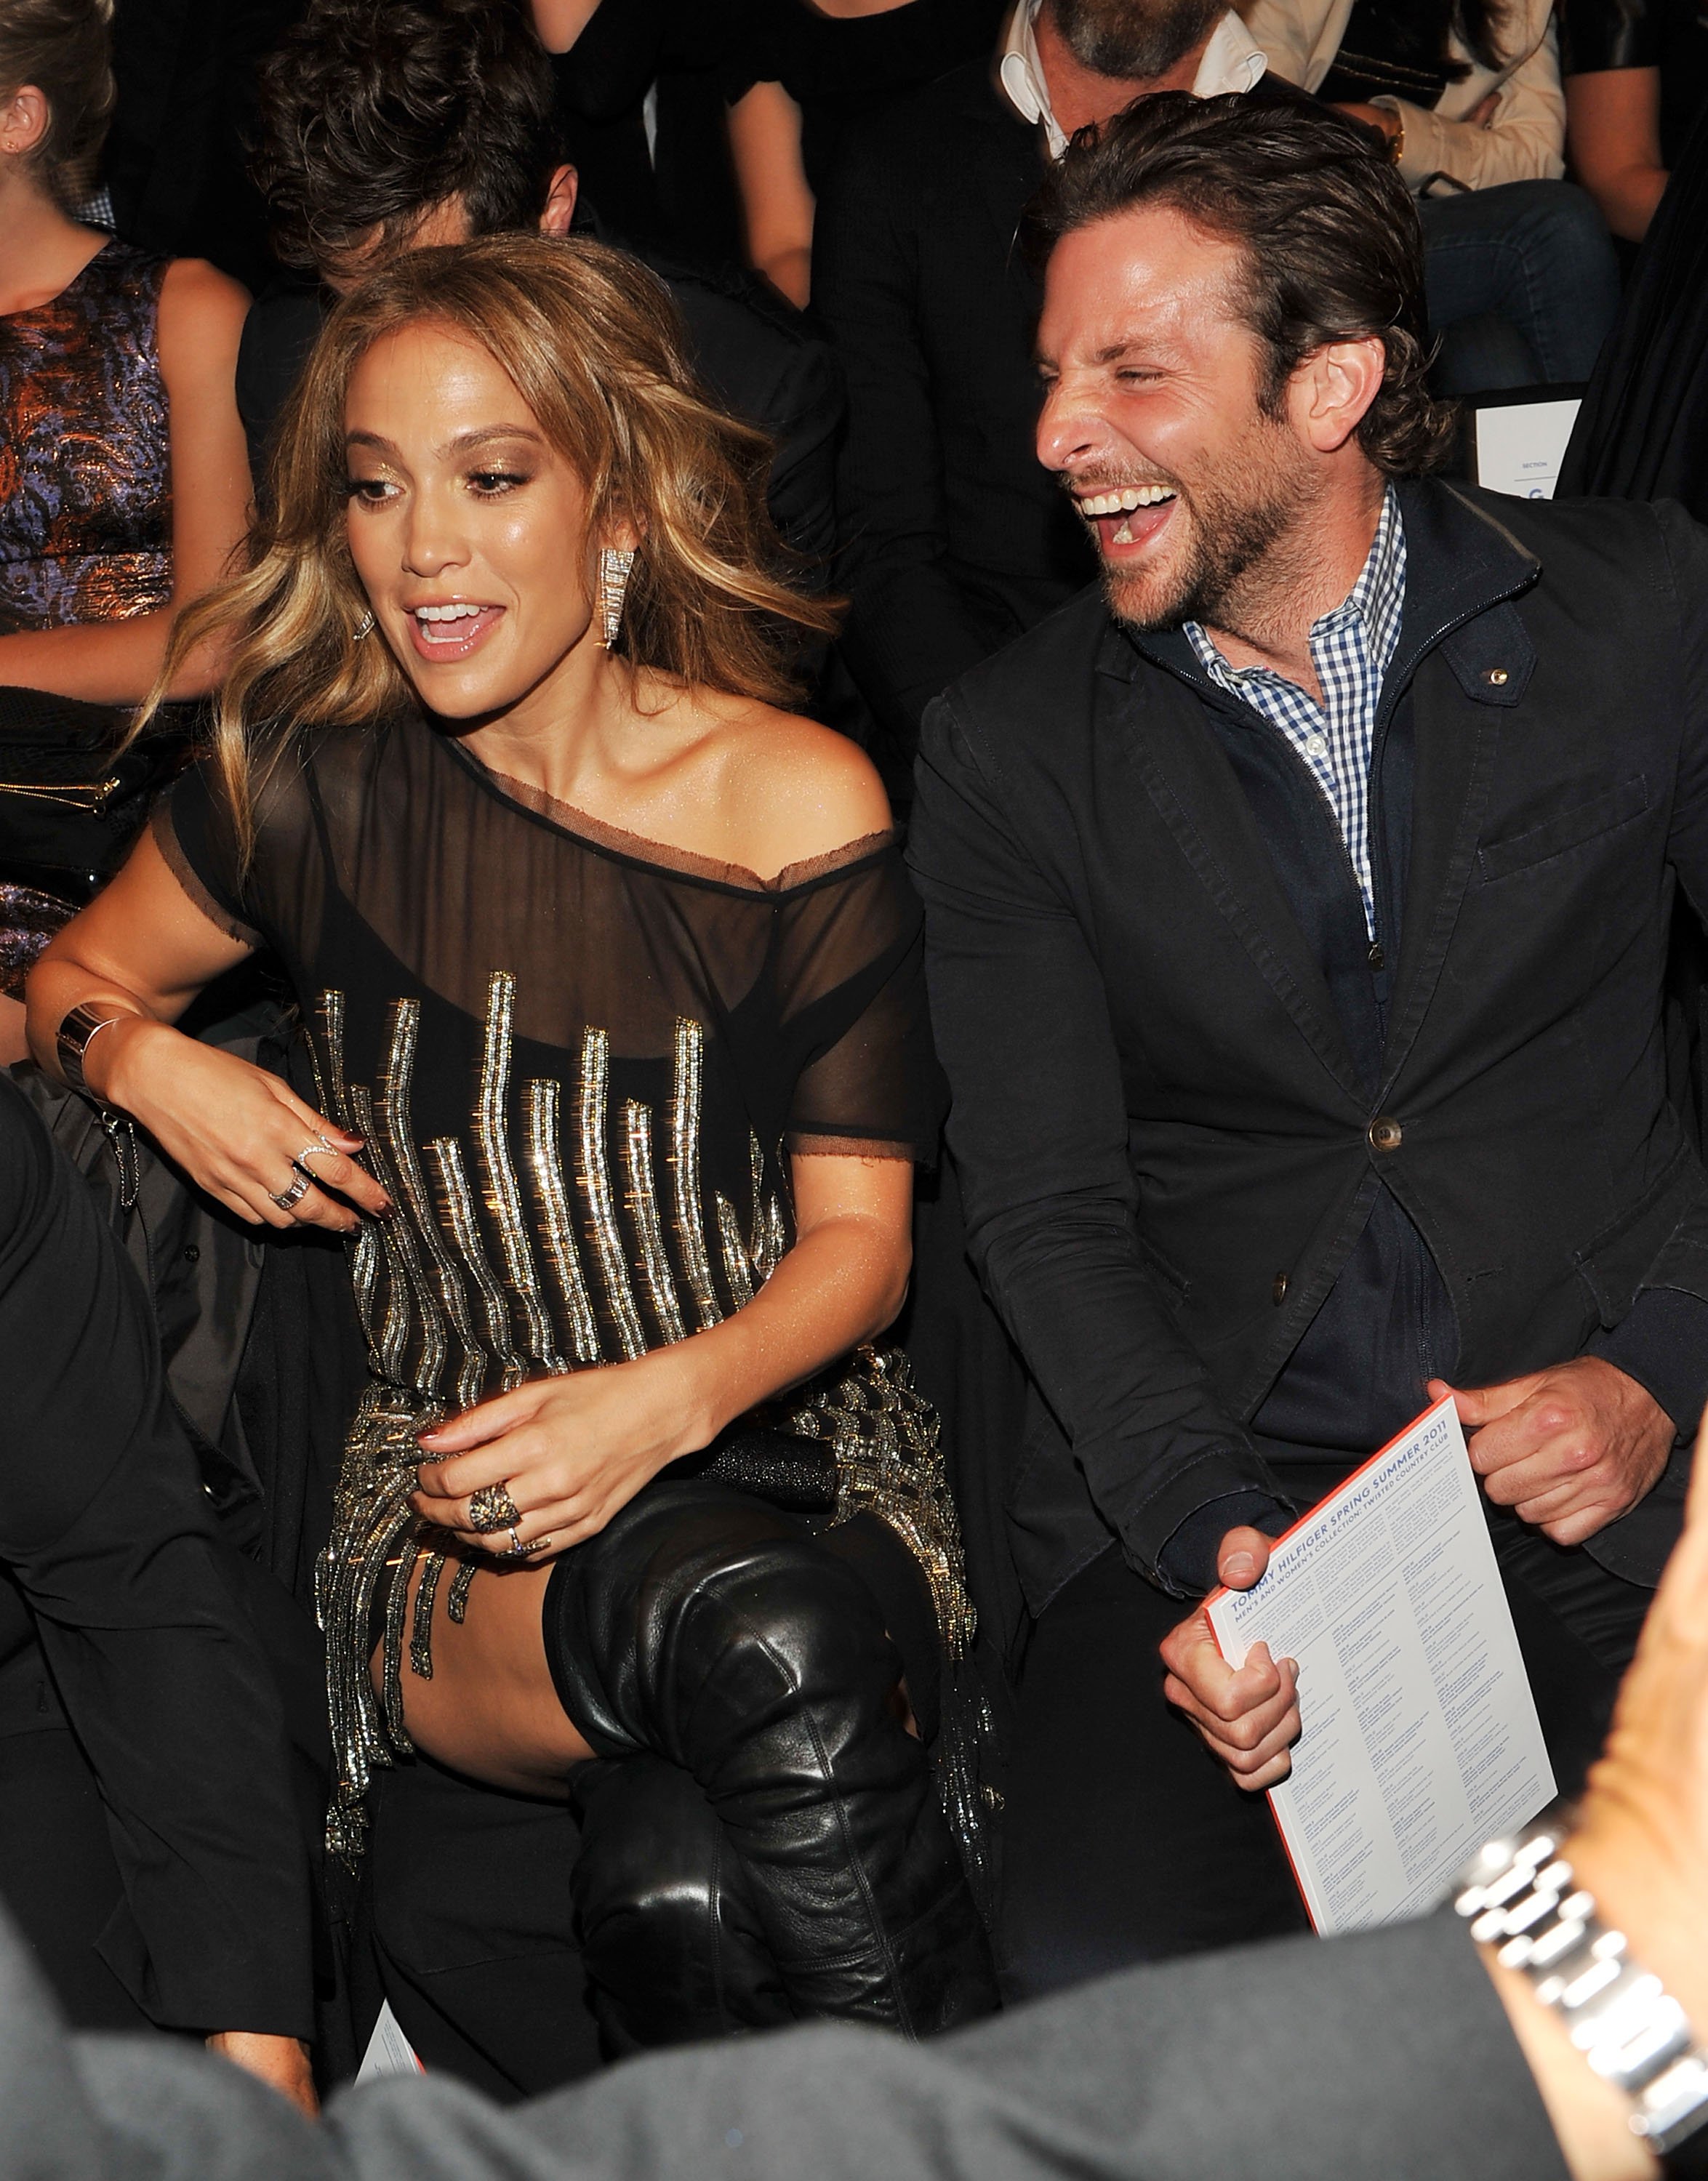 Jennifer Lopez and Actor Bradley Cooper during Mercedes-Benz fashion week at Lincoln Center on September 12, 2010 in New York City. | Source: Getty Images